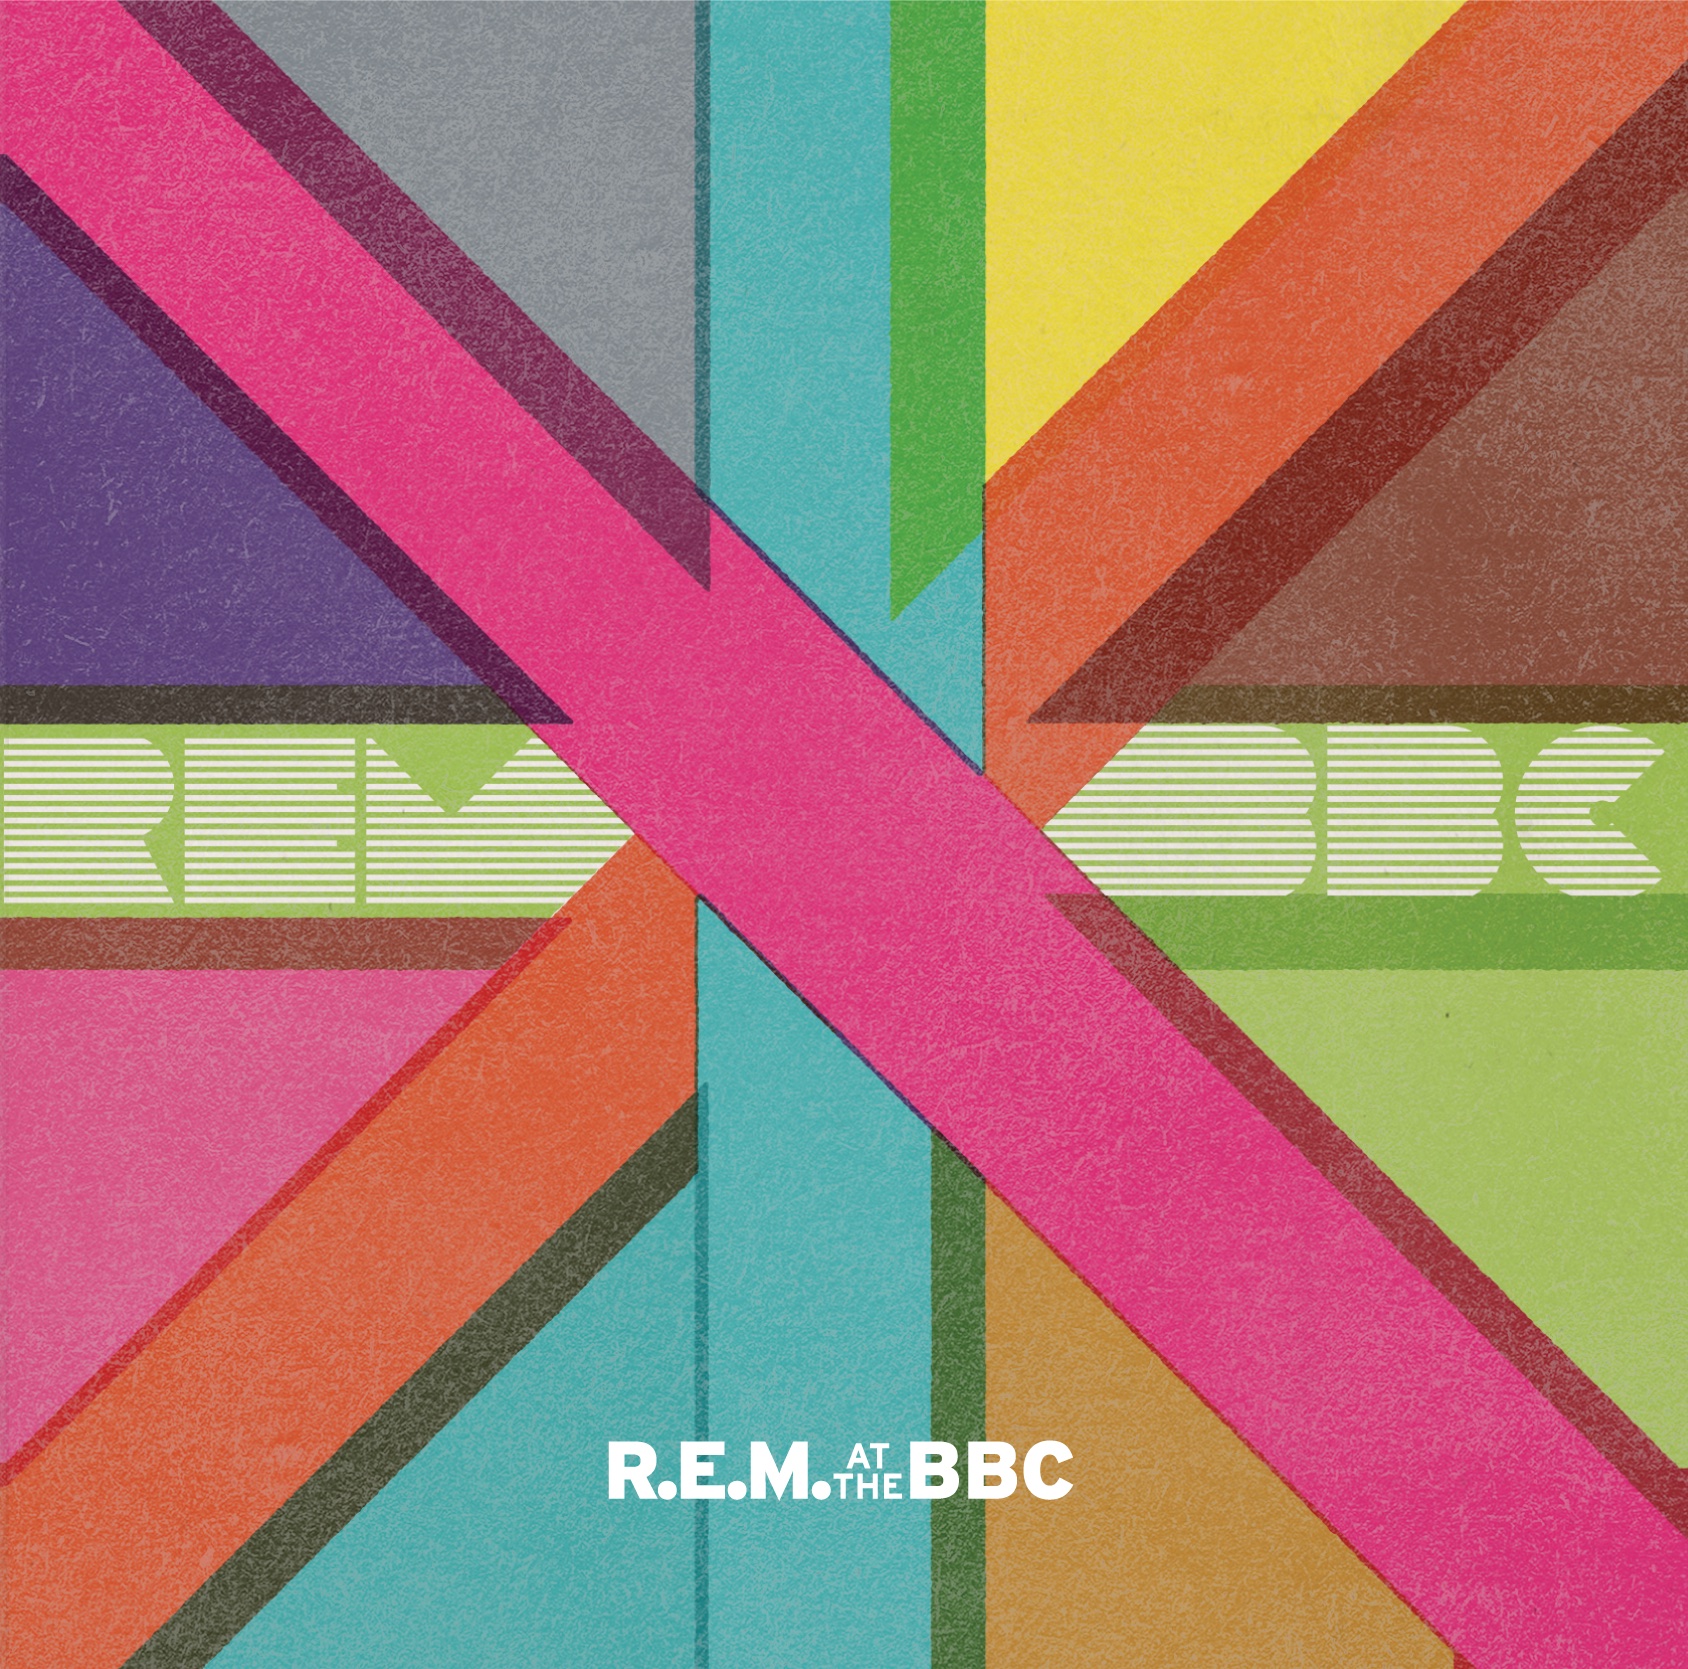 NEWS: R.E.M. at the BBC collection announced featuring live and studio recordings from over 30 years 2